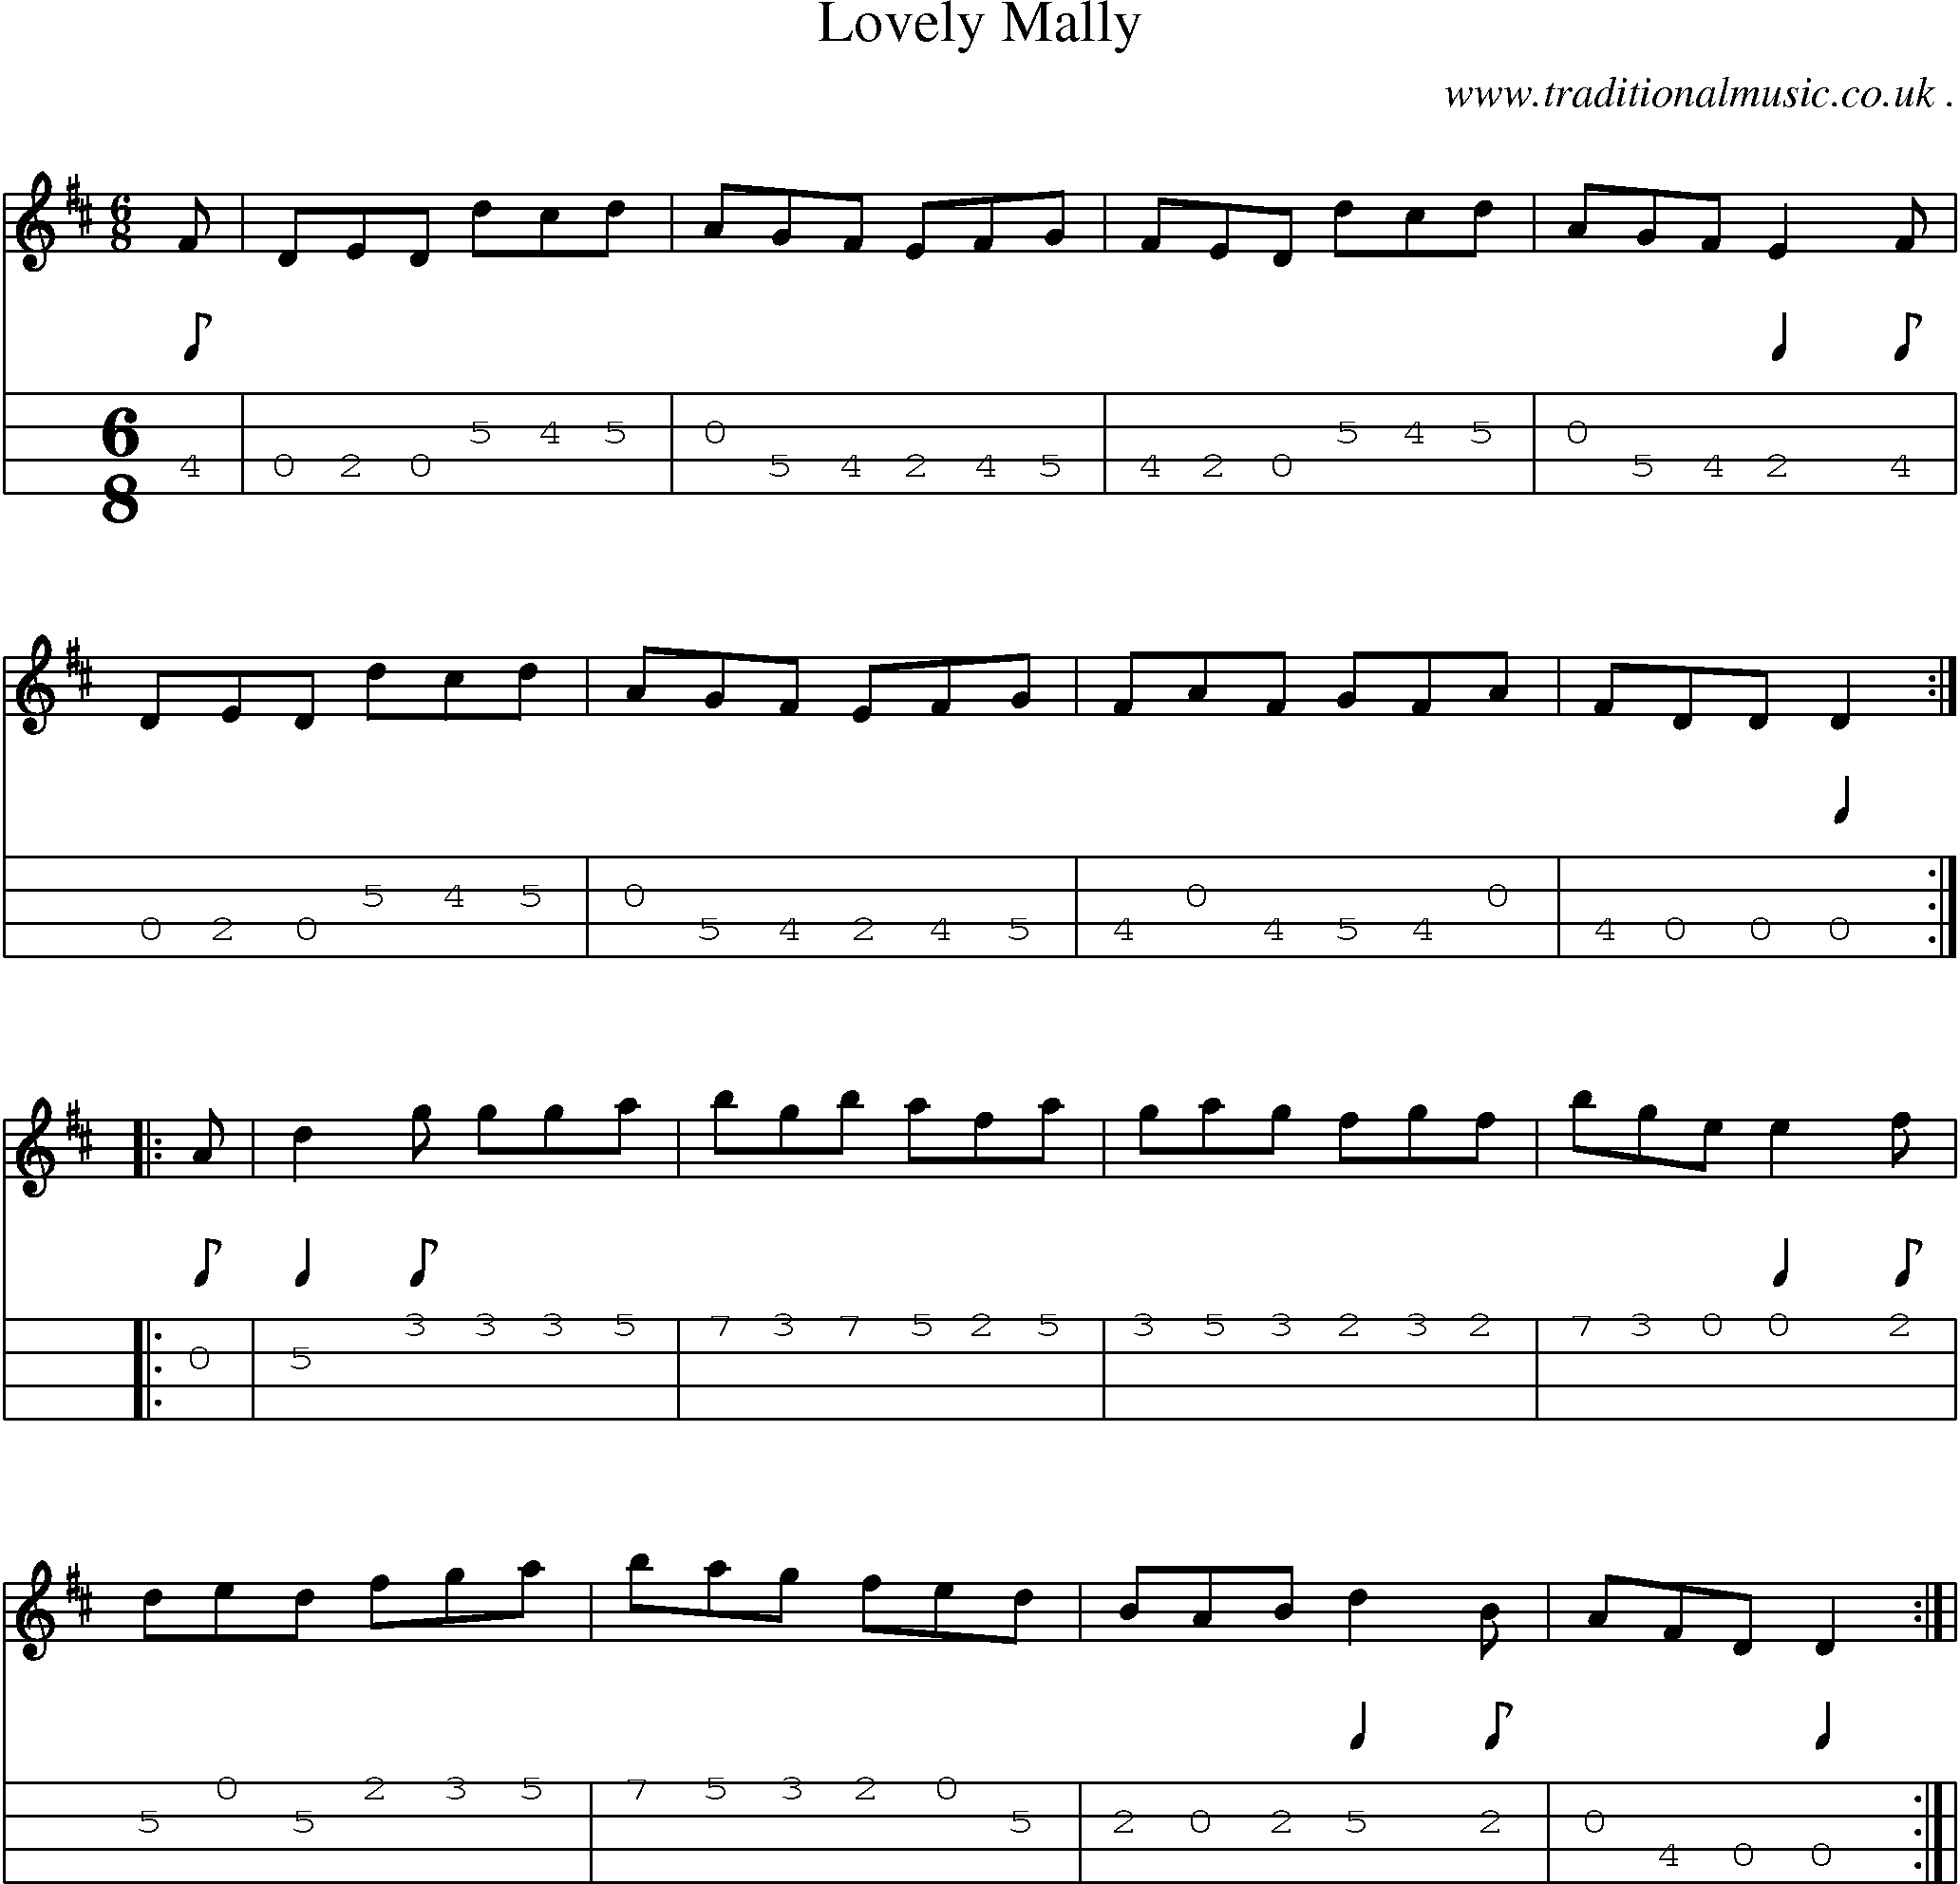 Sheet-Music and Mandolin Tabs for Lovely Mally